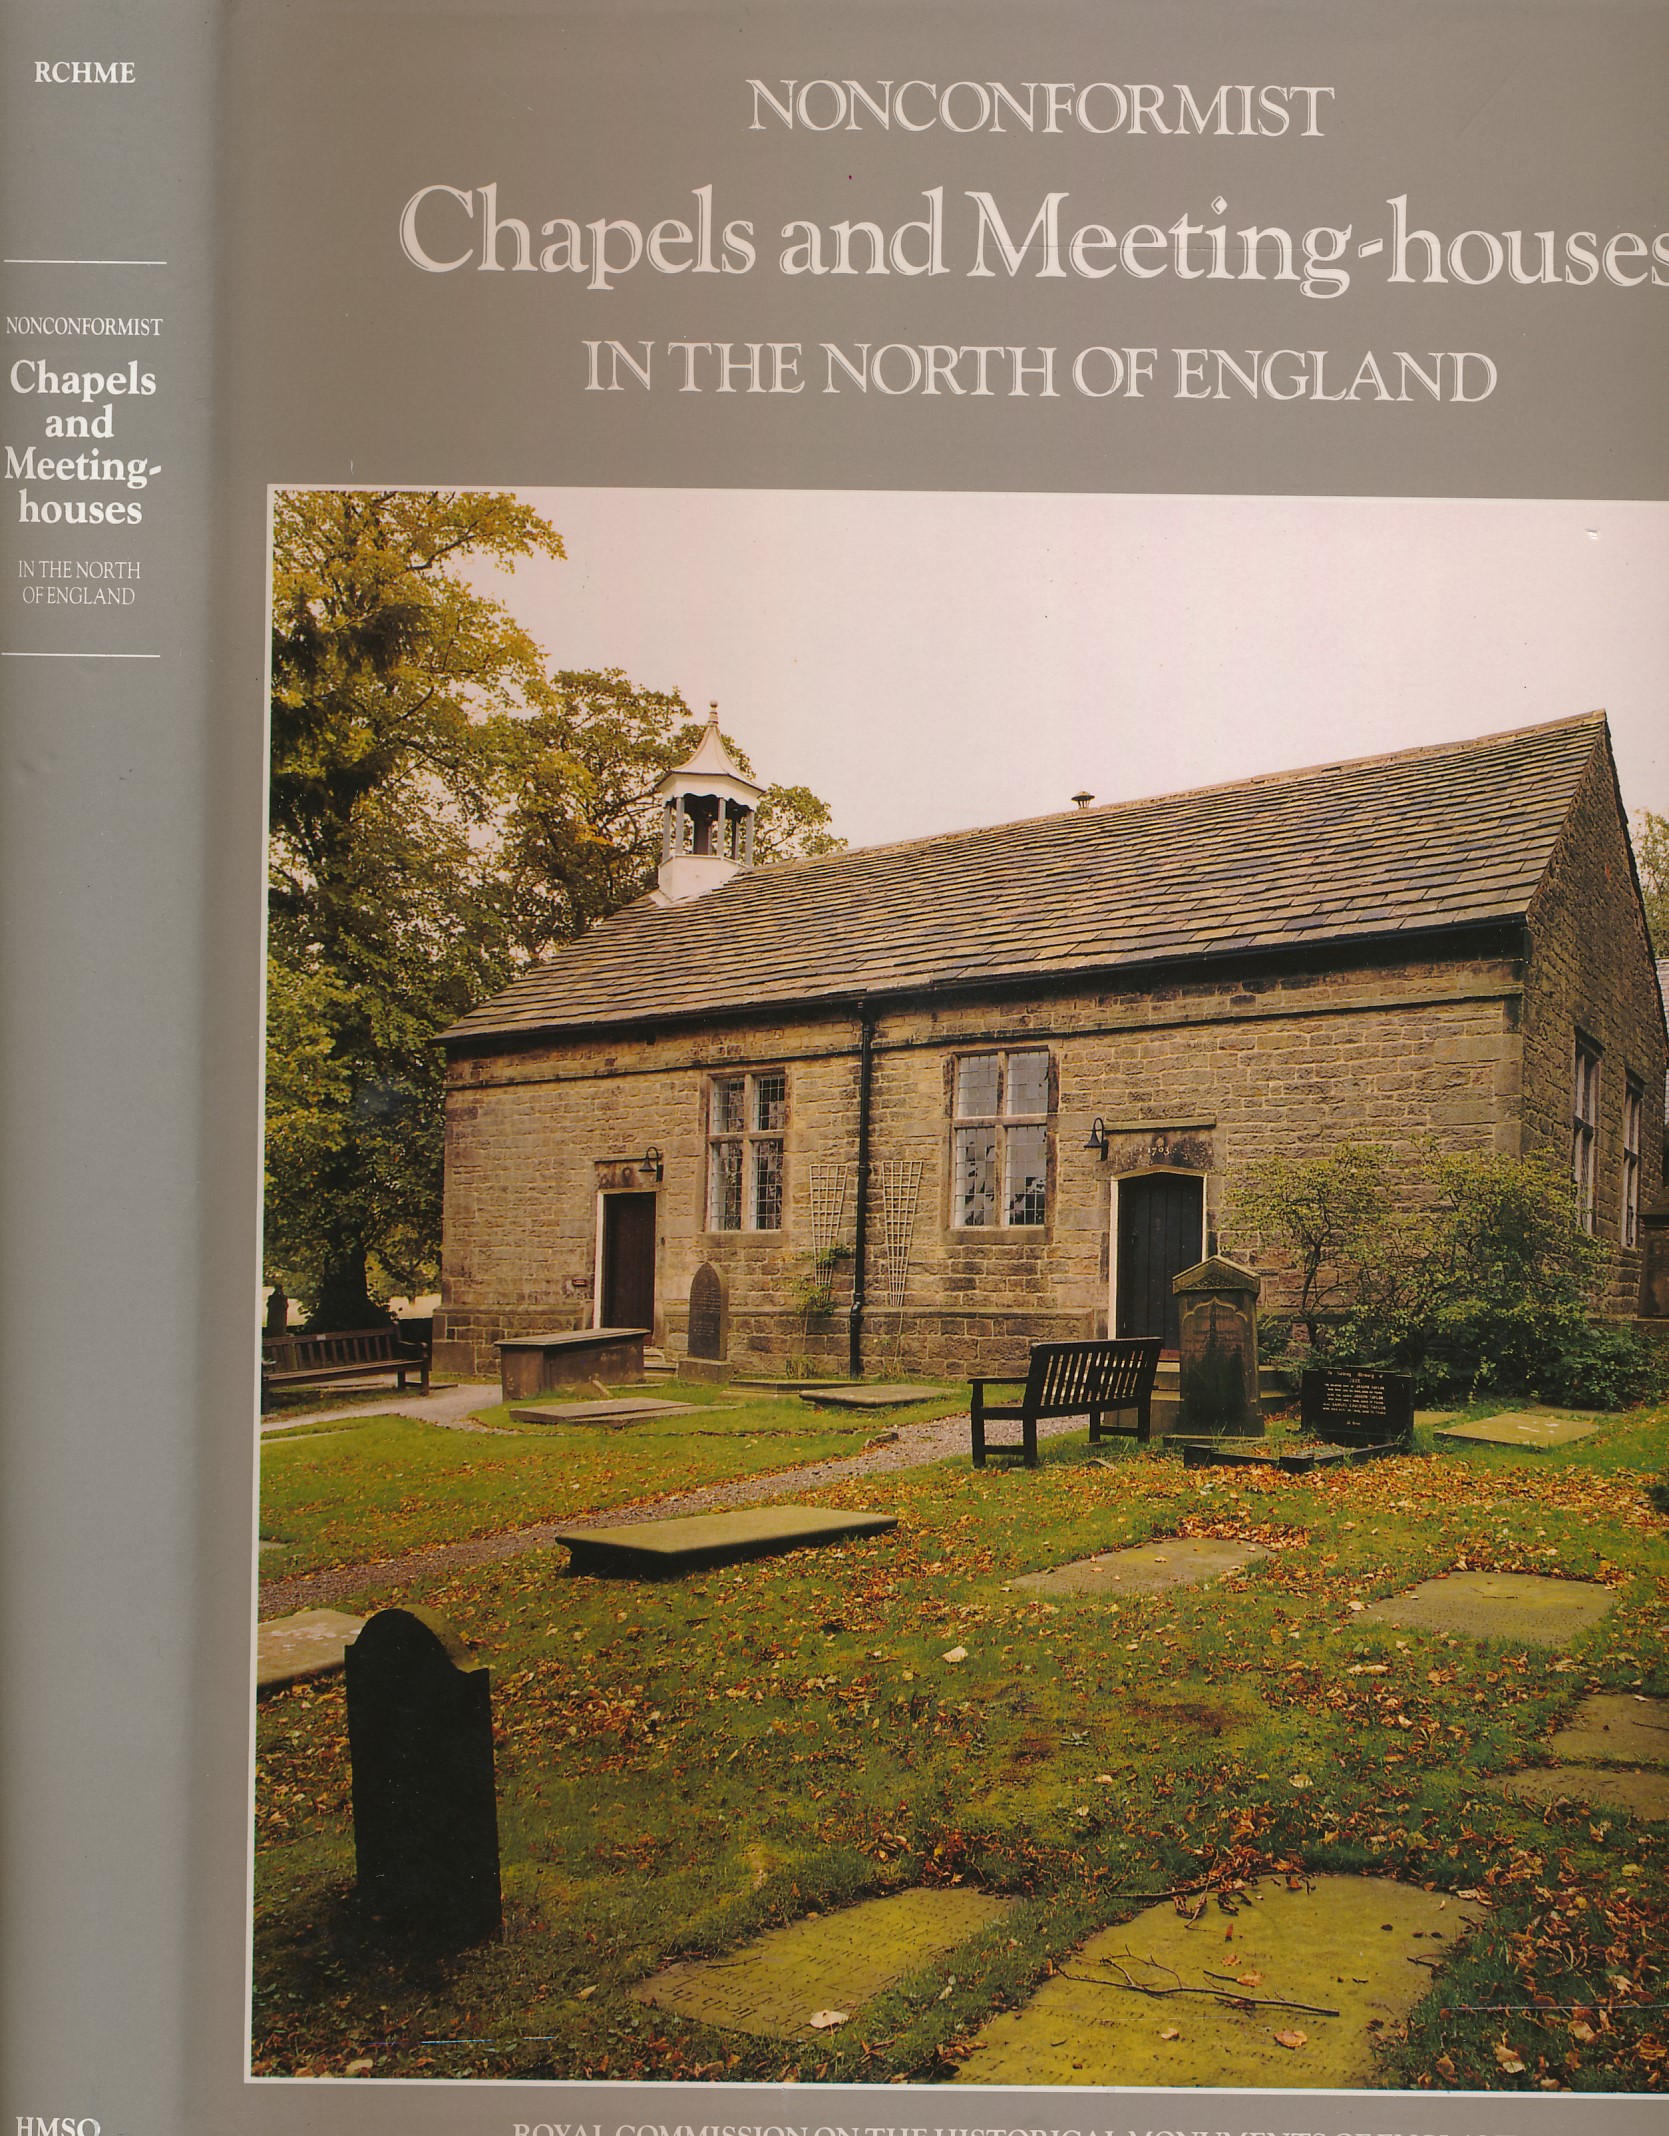 Nonconformist Chapels and Meeting Houses in the North of England